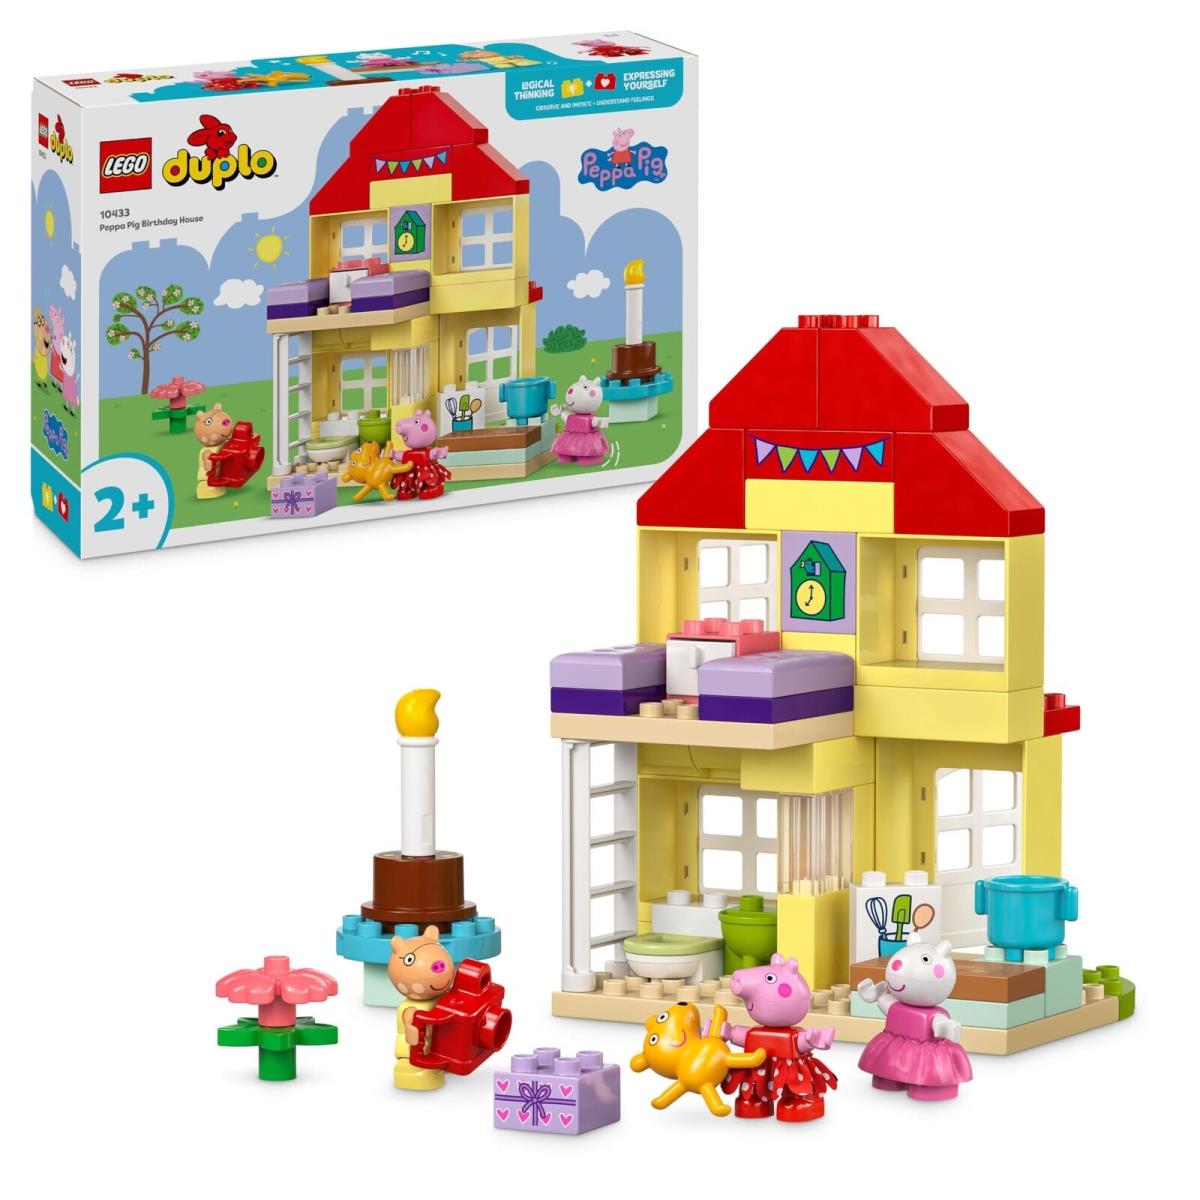 Lego Duplo Peppa Pig Birthday House Playset Toddler Learning Toys For 2 Plus Ye